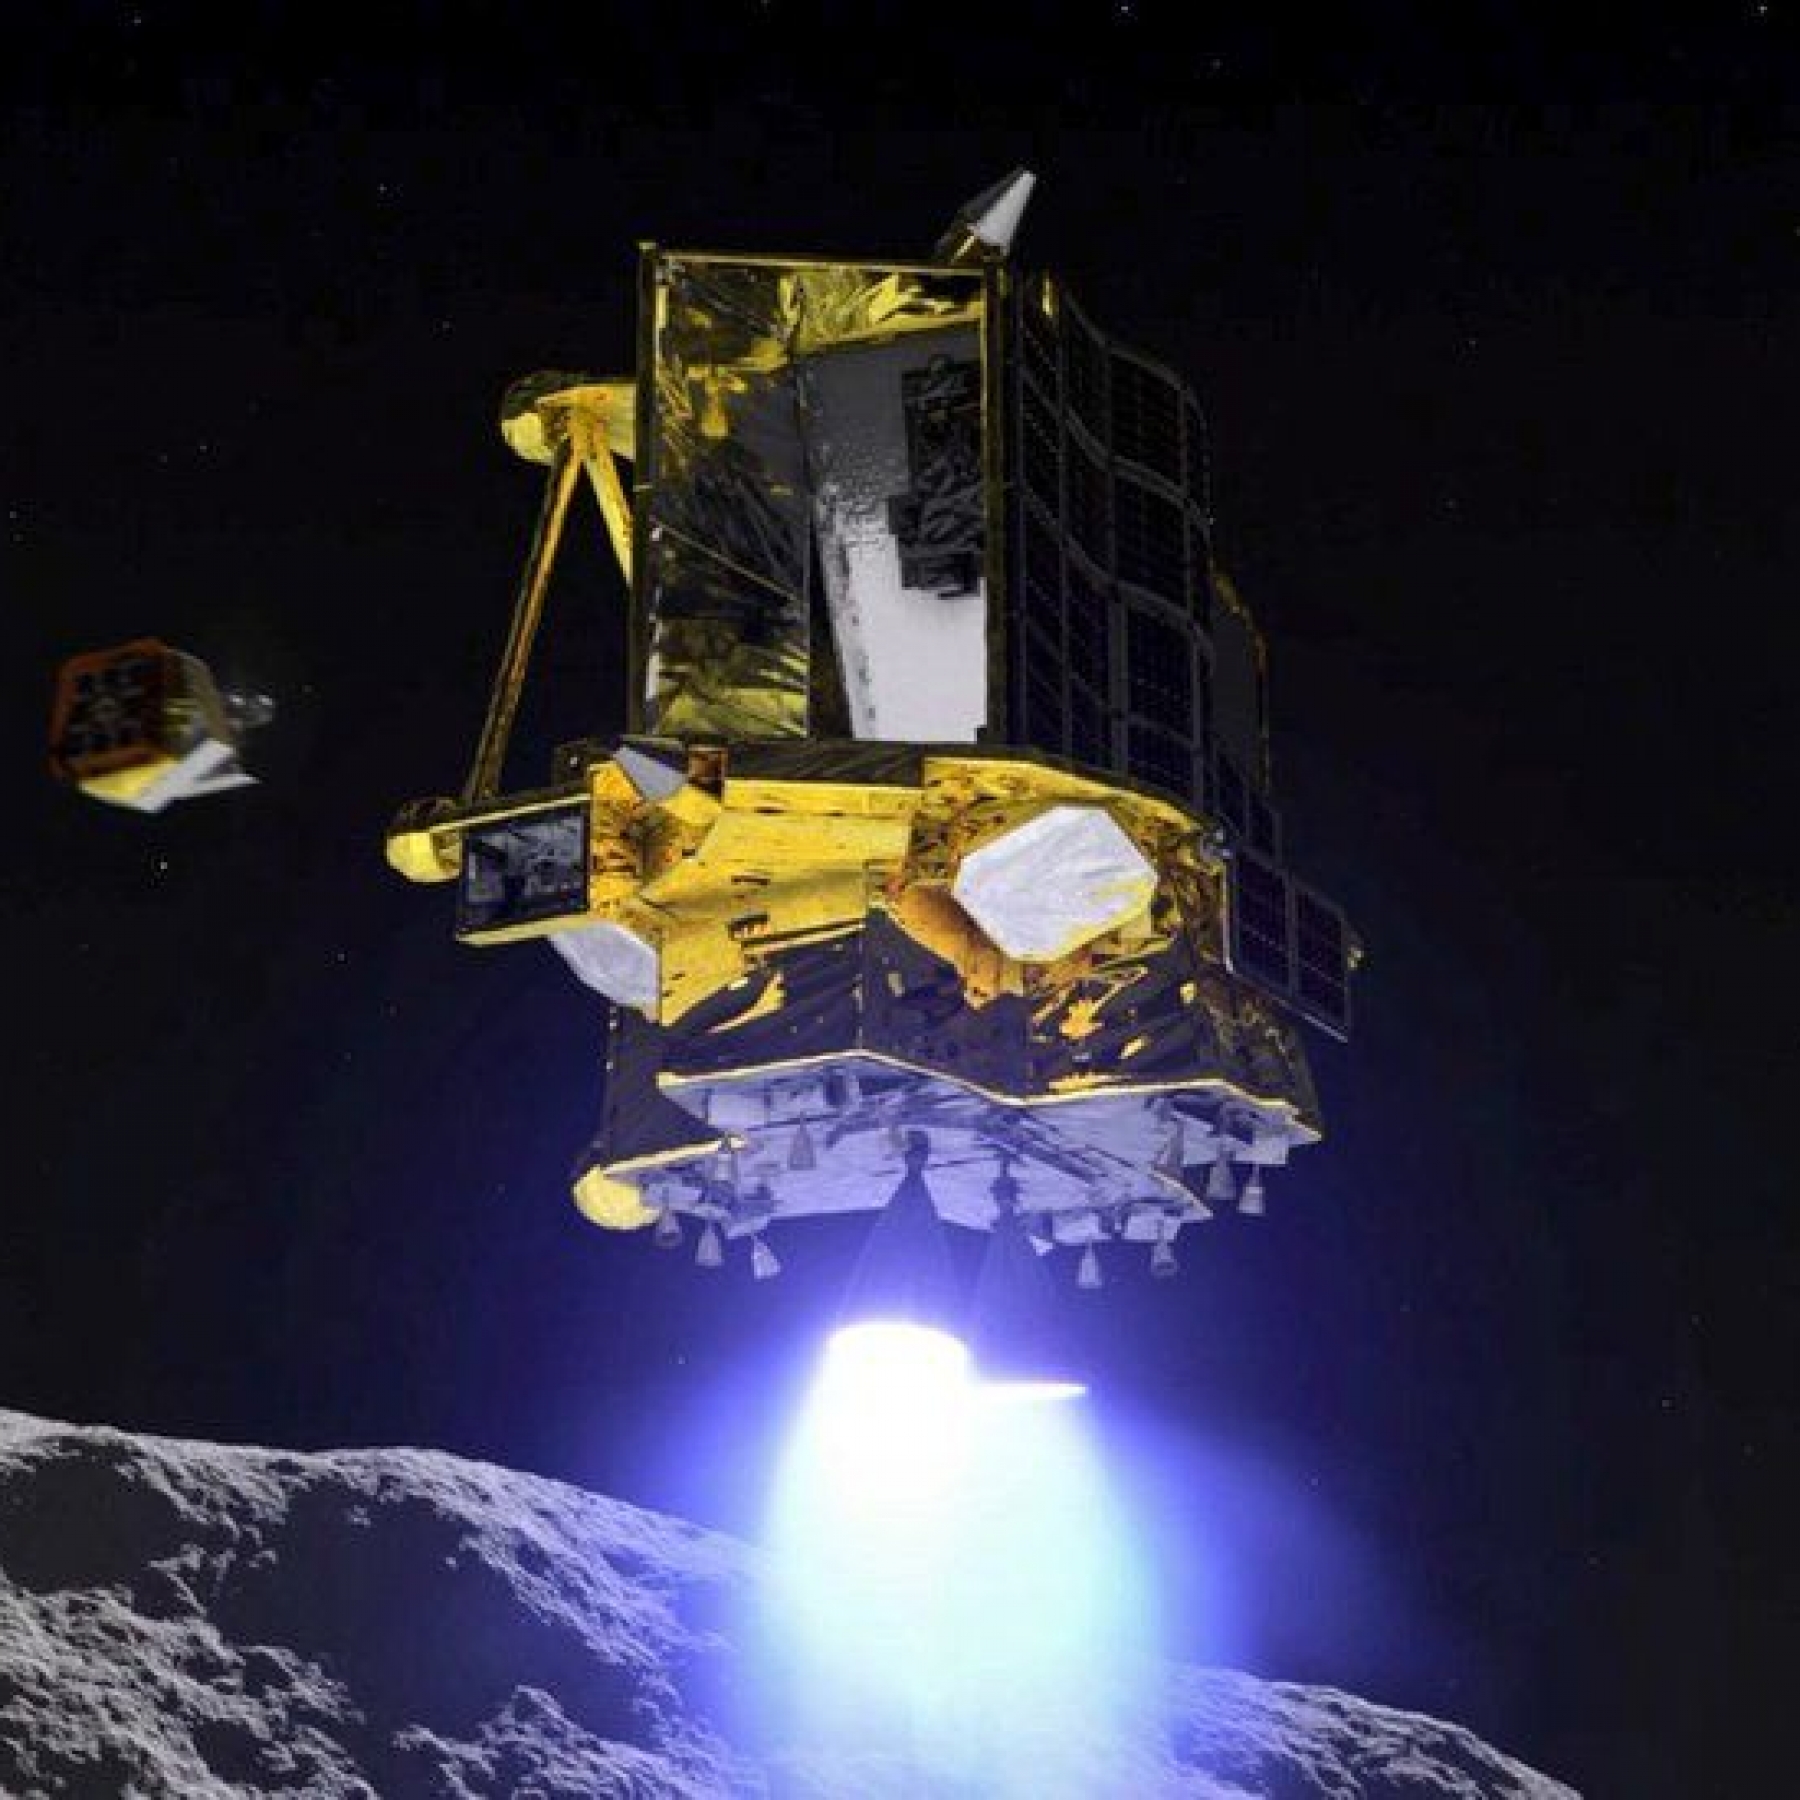 Artwork: Jaxa has become the fifth national space agency to land on the Moon